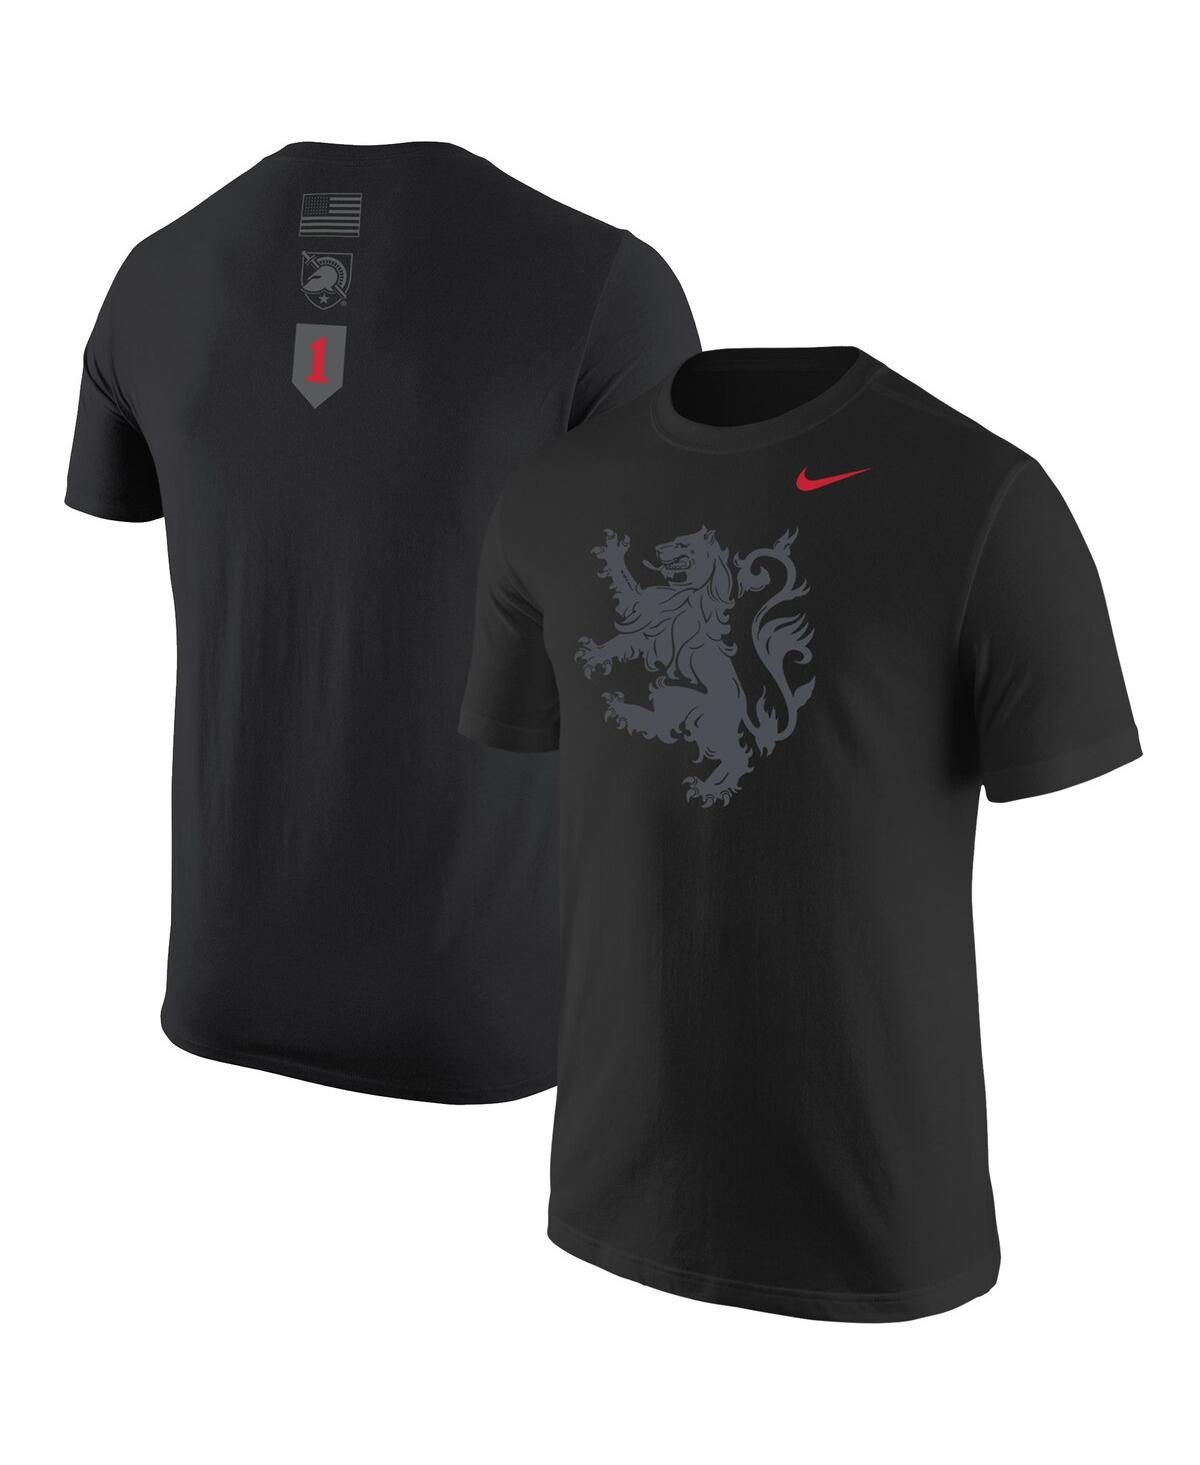 UPC 191182815831 product image for Men's Black Army Black Knights Rivalry Lion T-shirt | upcitemdb.com